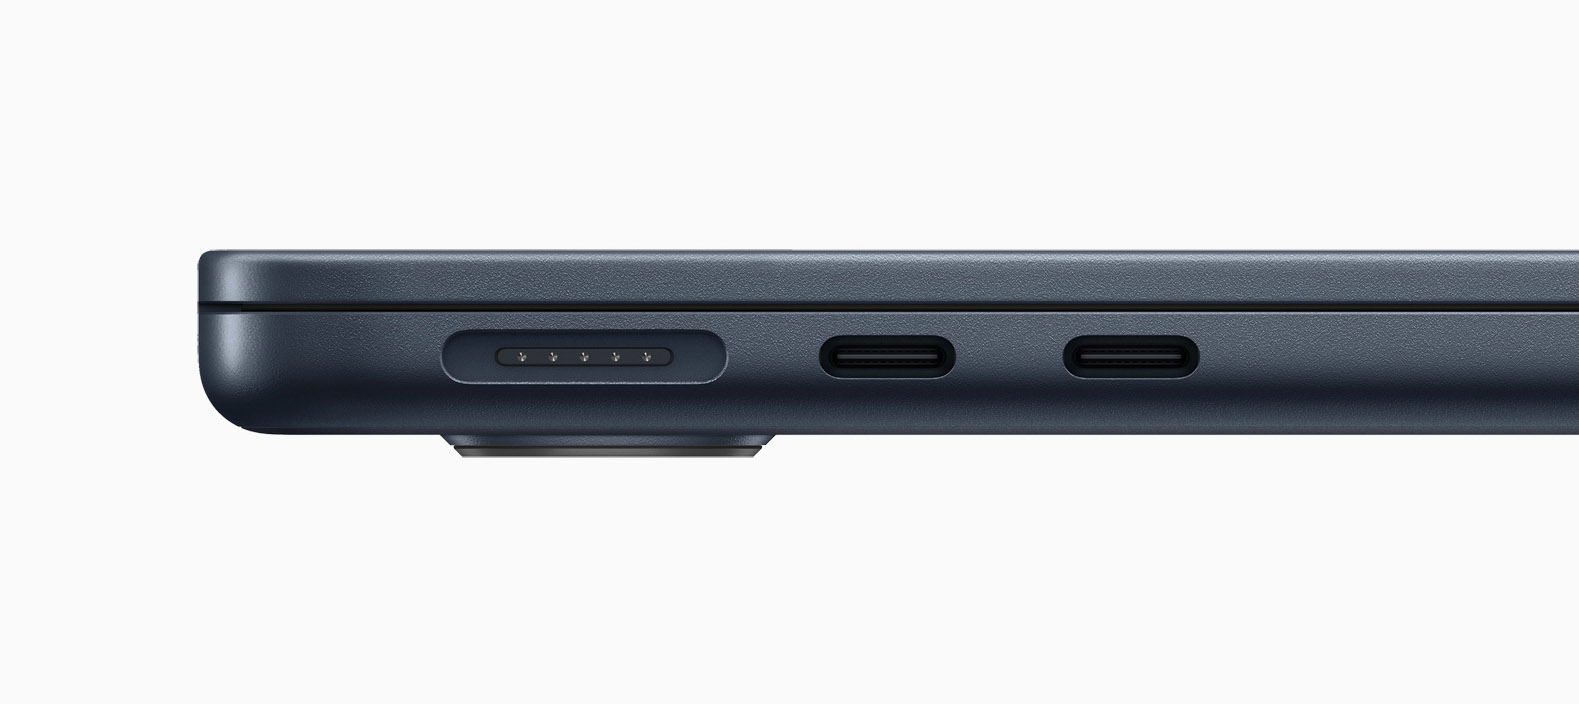 MacBook Air from the side showing Magsafe and two Thunderbolt ports